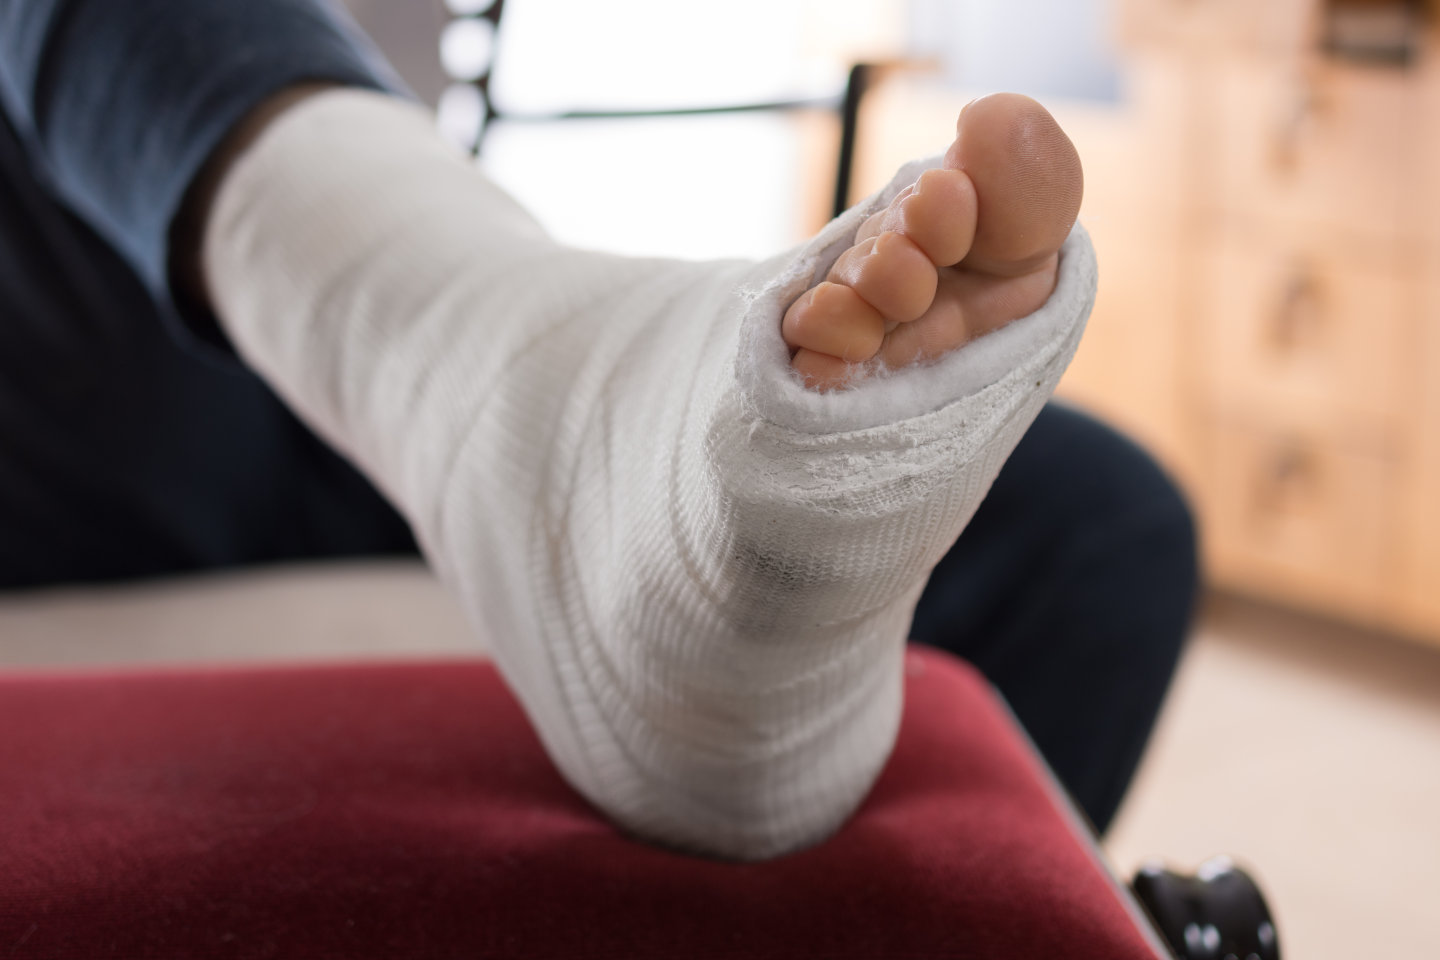 Cast For a Broke Bone: What Is It Made Of?